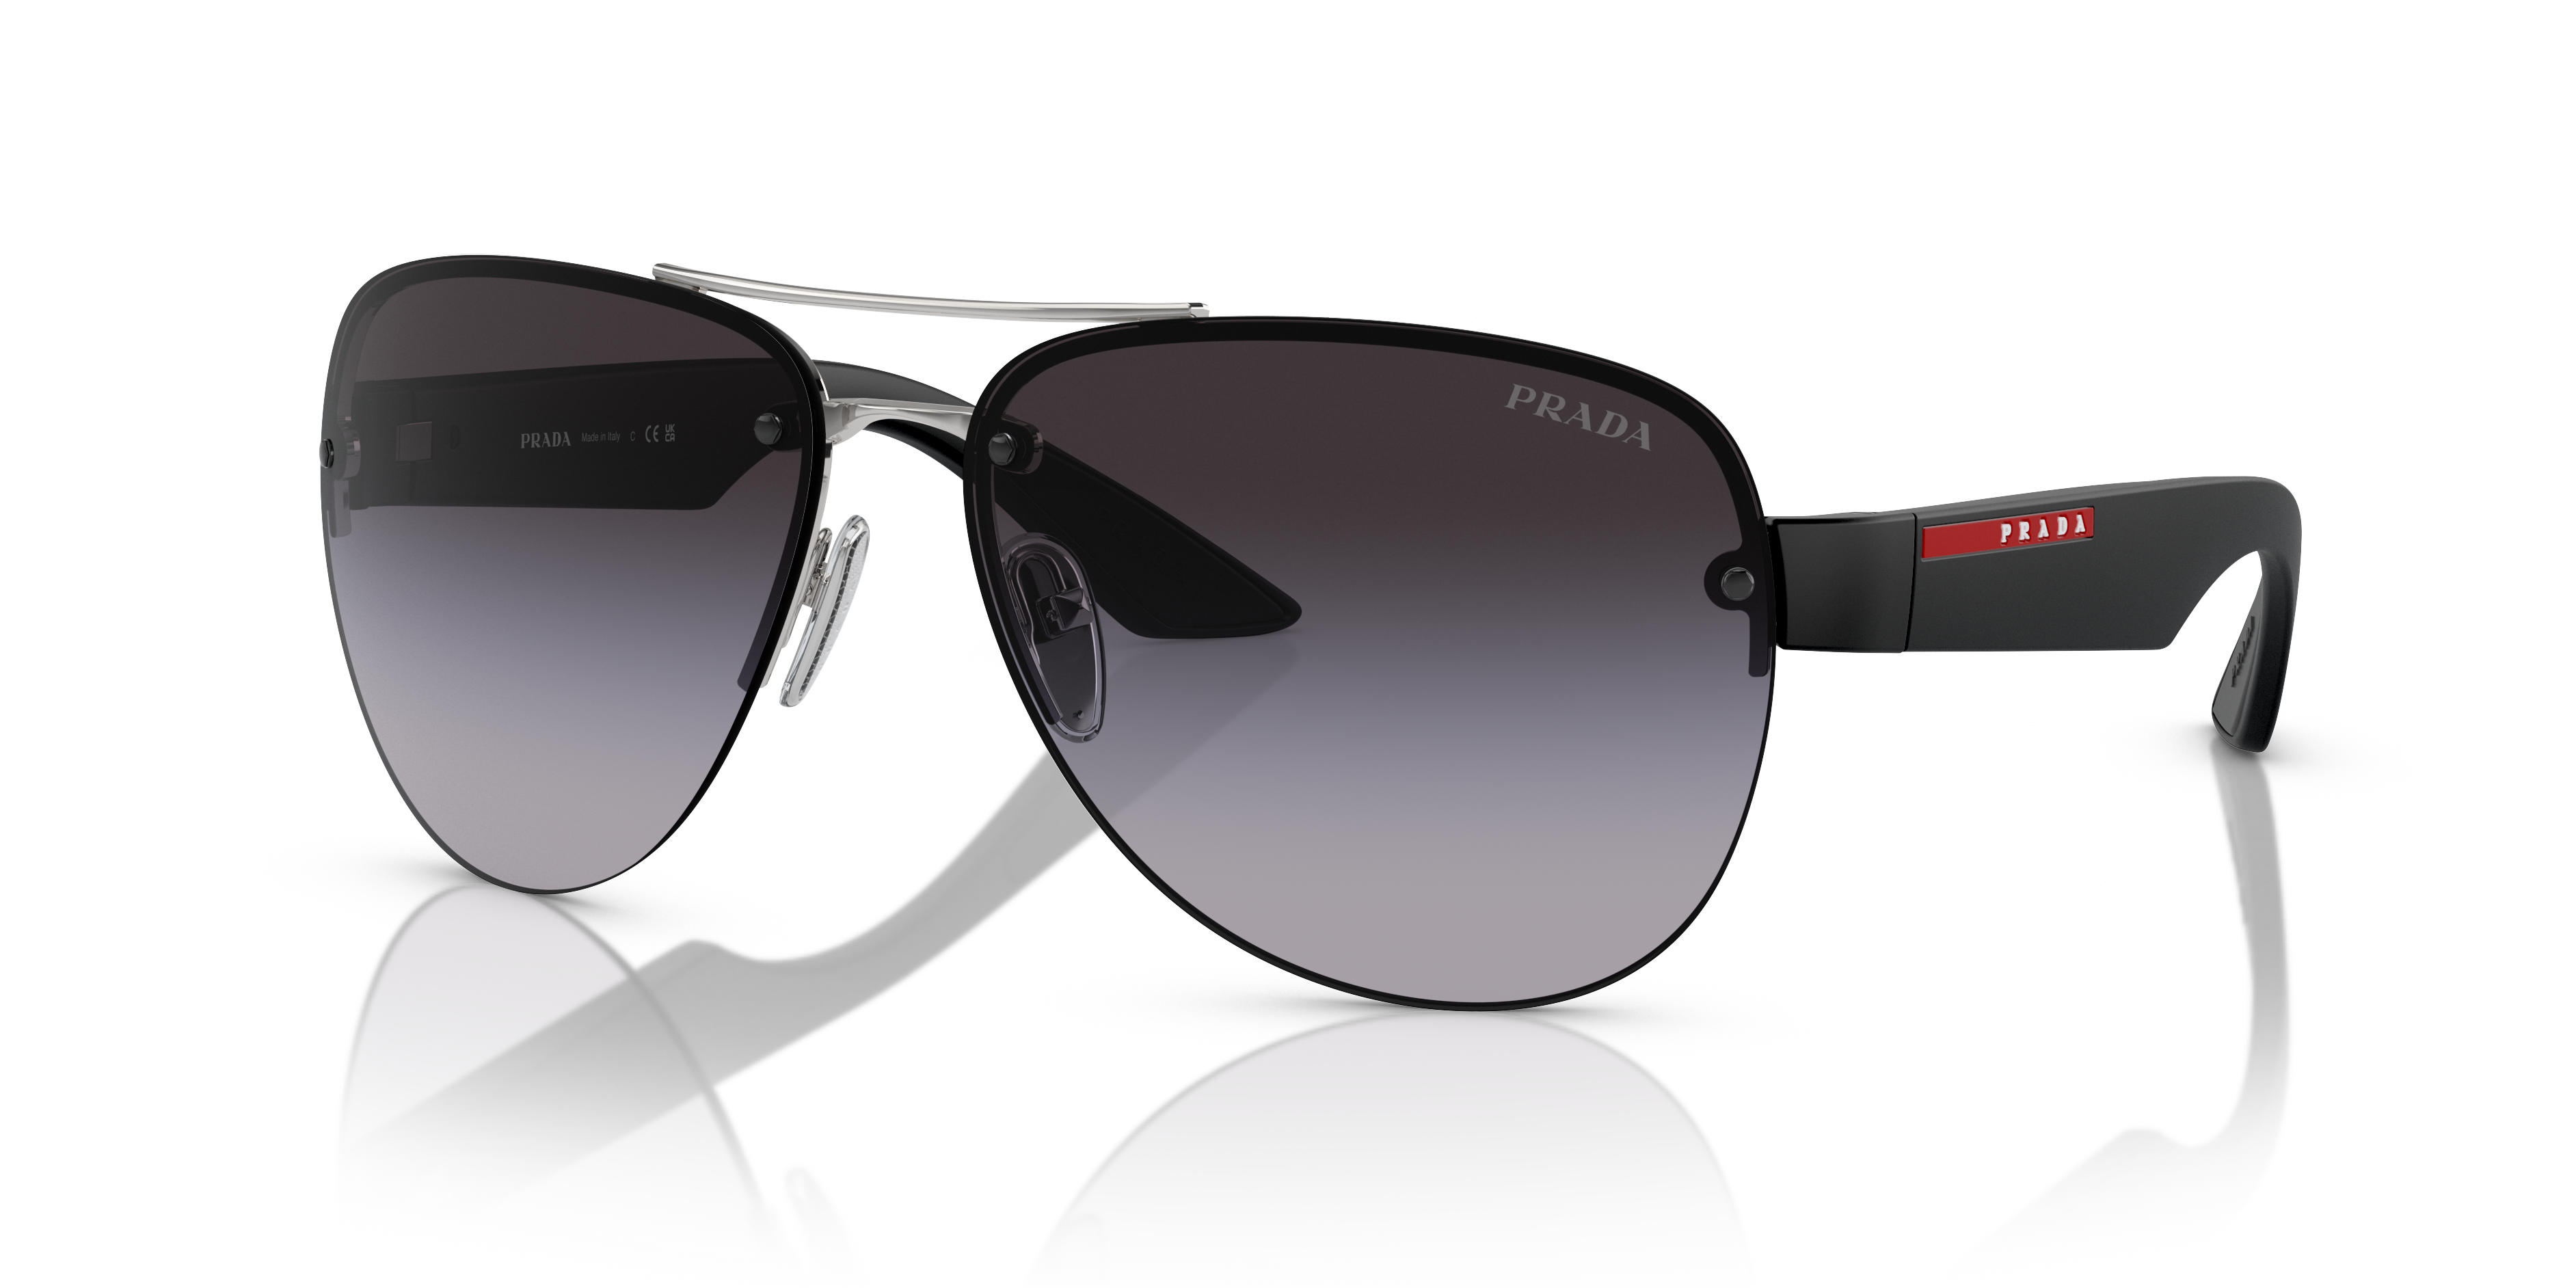 Sunglass Hut and Ready Player Me Collaborate to Bring Digital Sunglasses to  Avatars